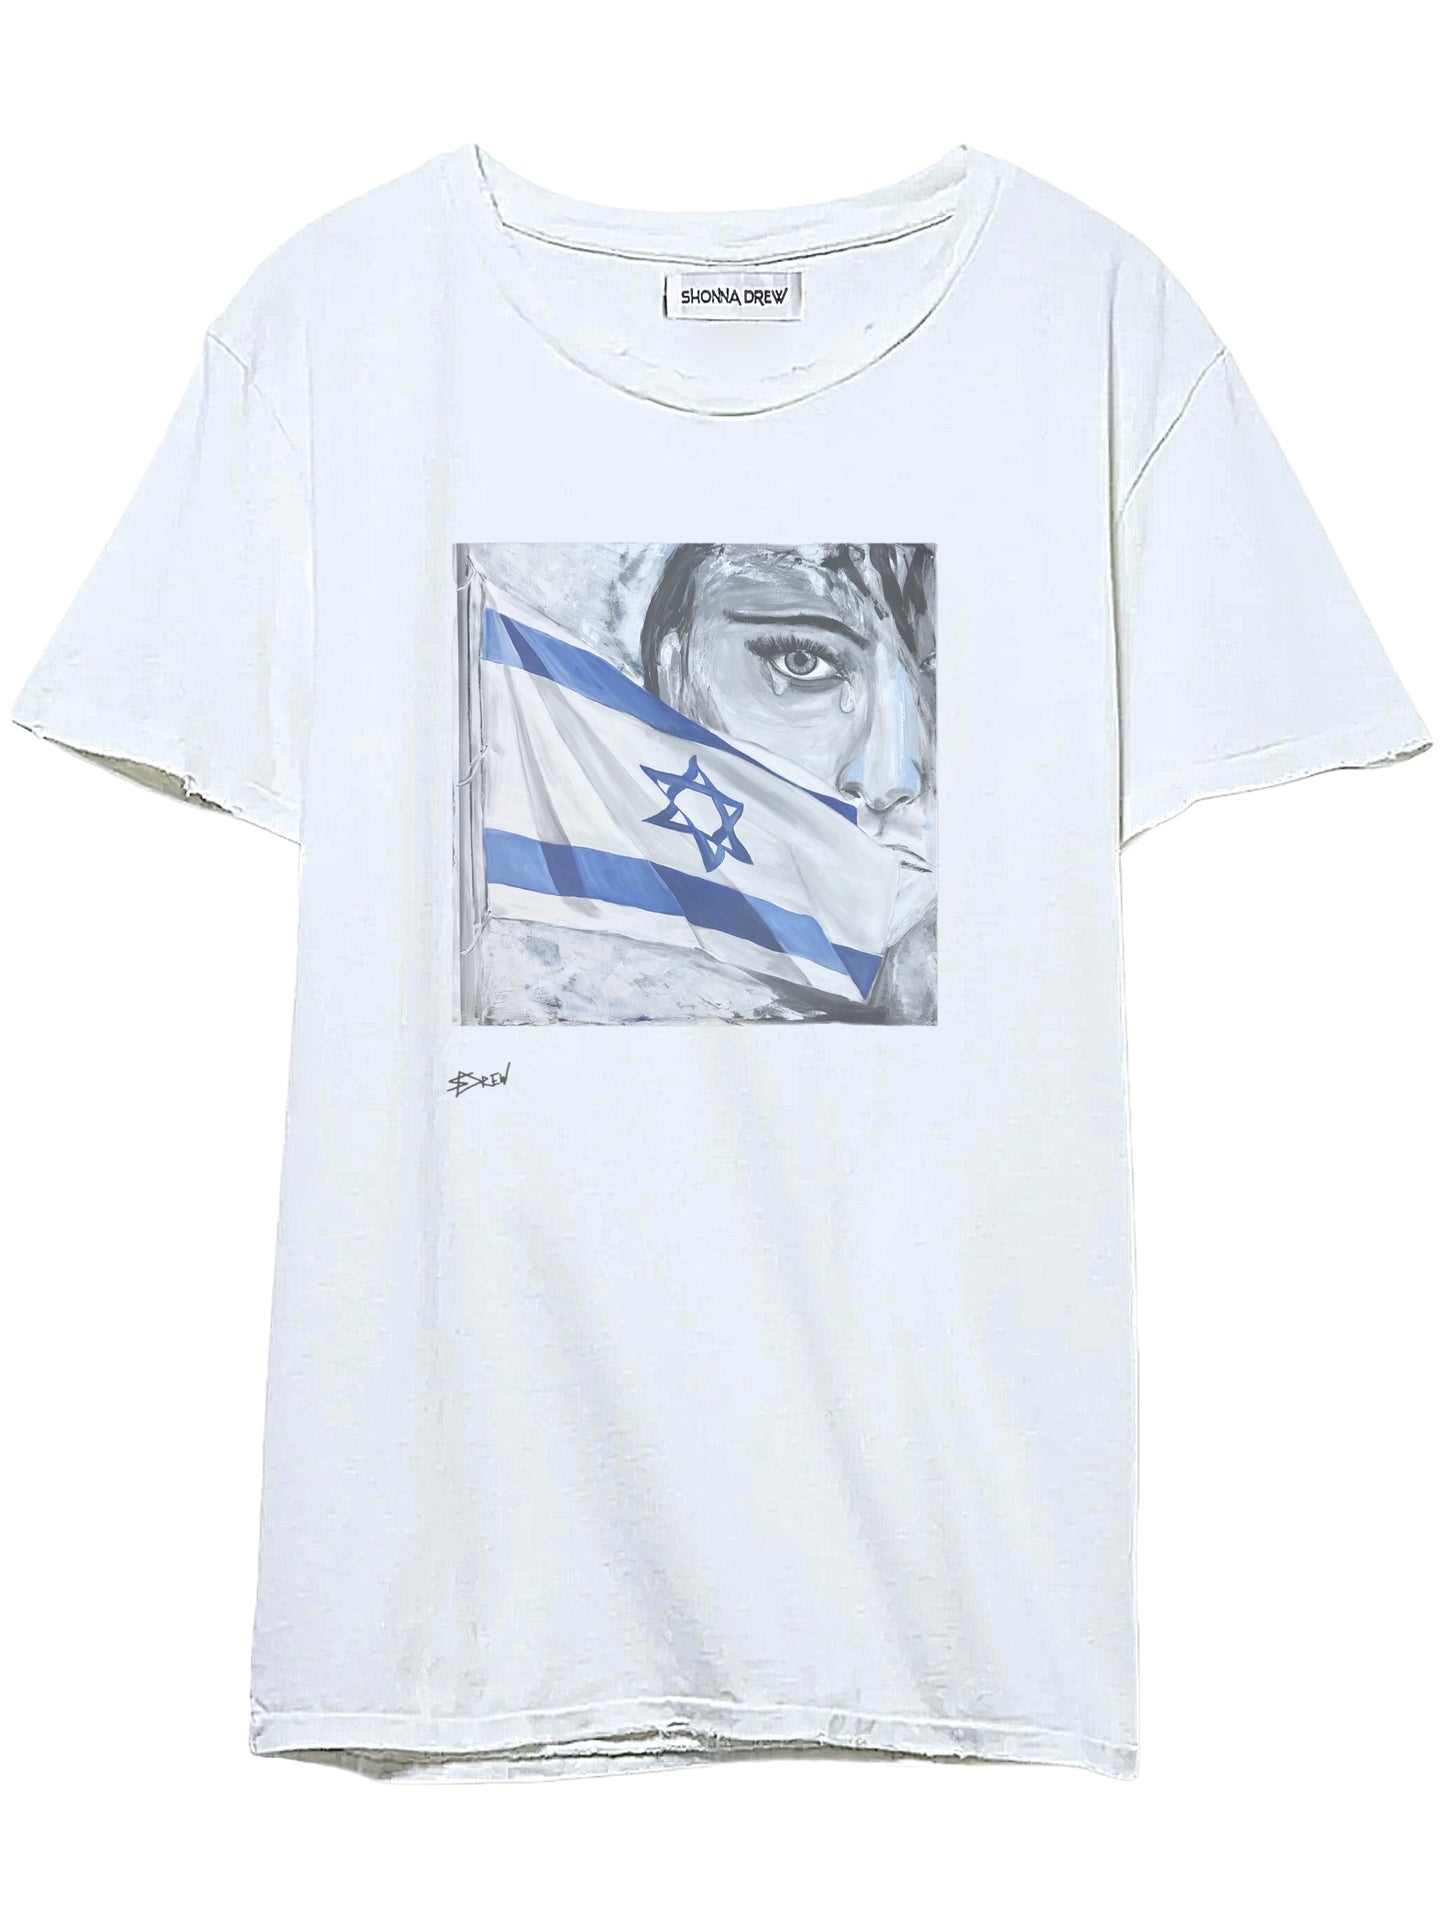 “The Hope” Distressed Marty T-shirt/ MEN’S